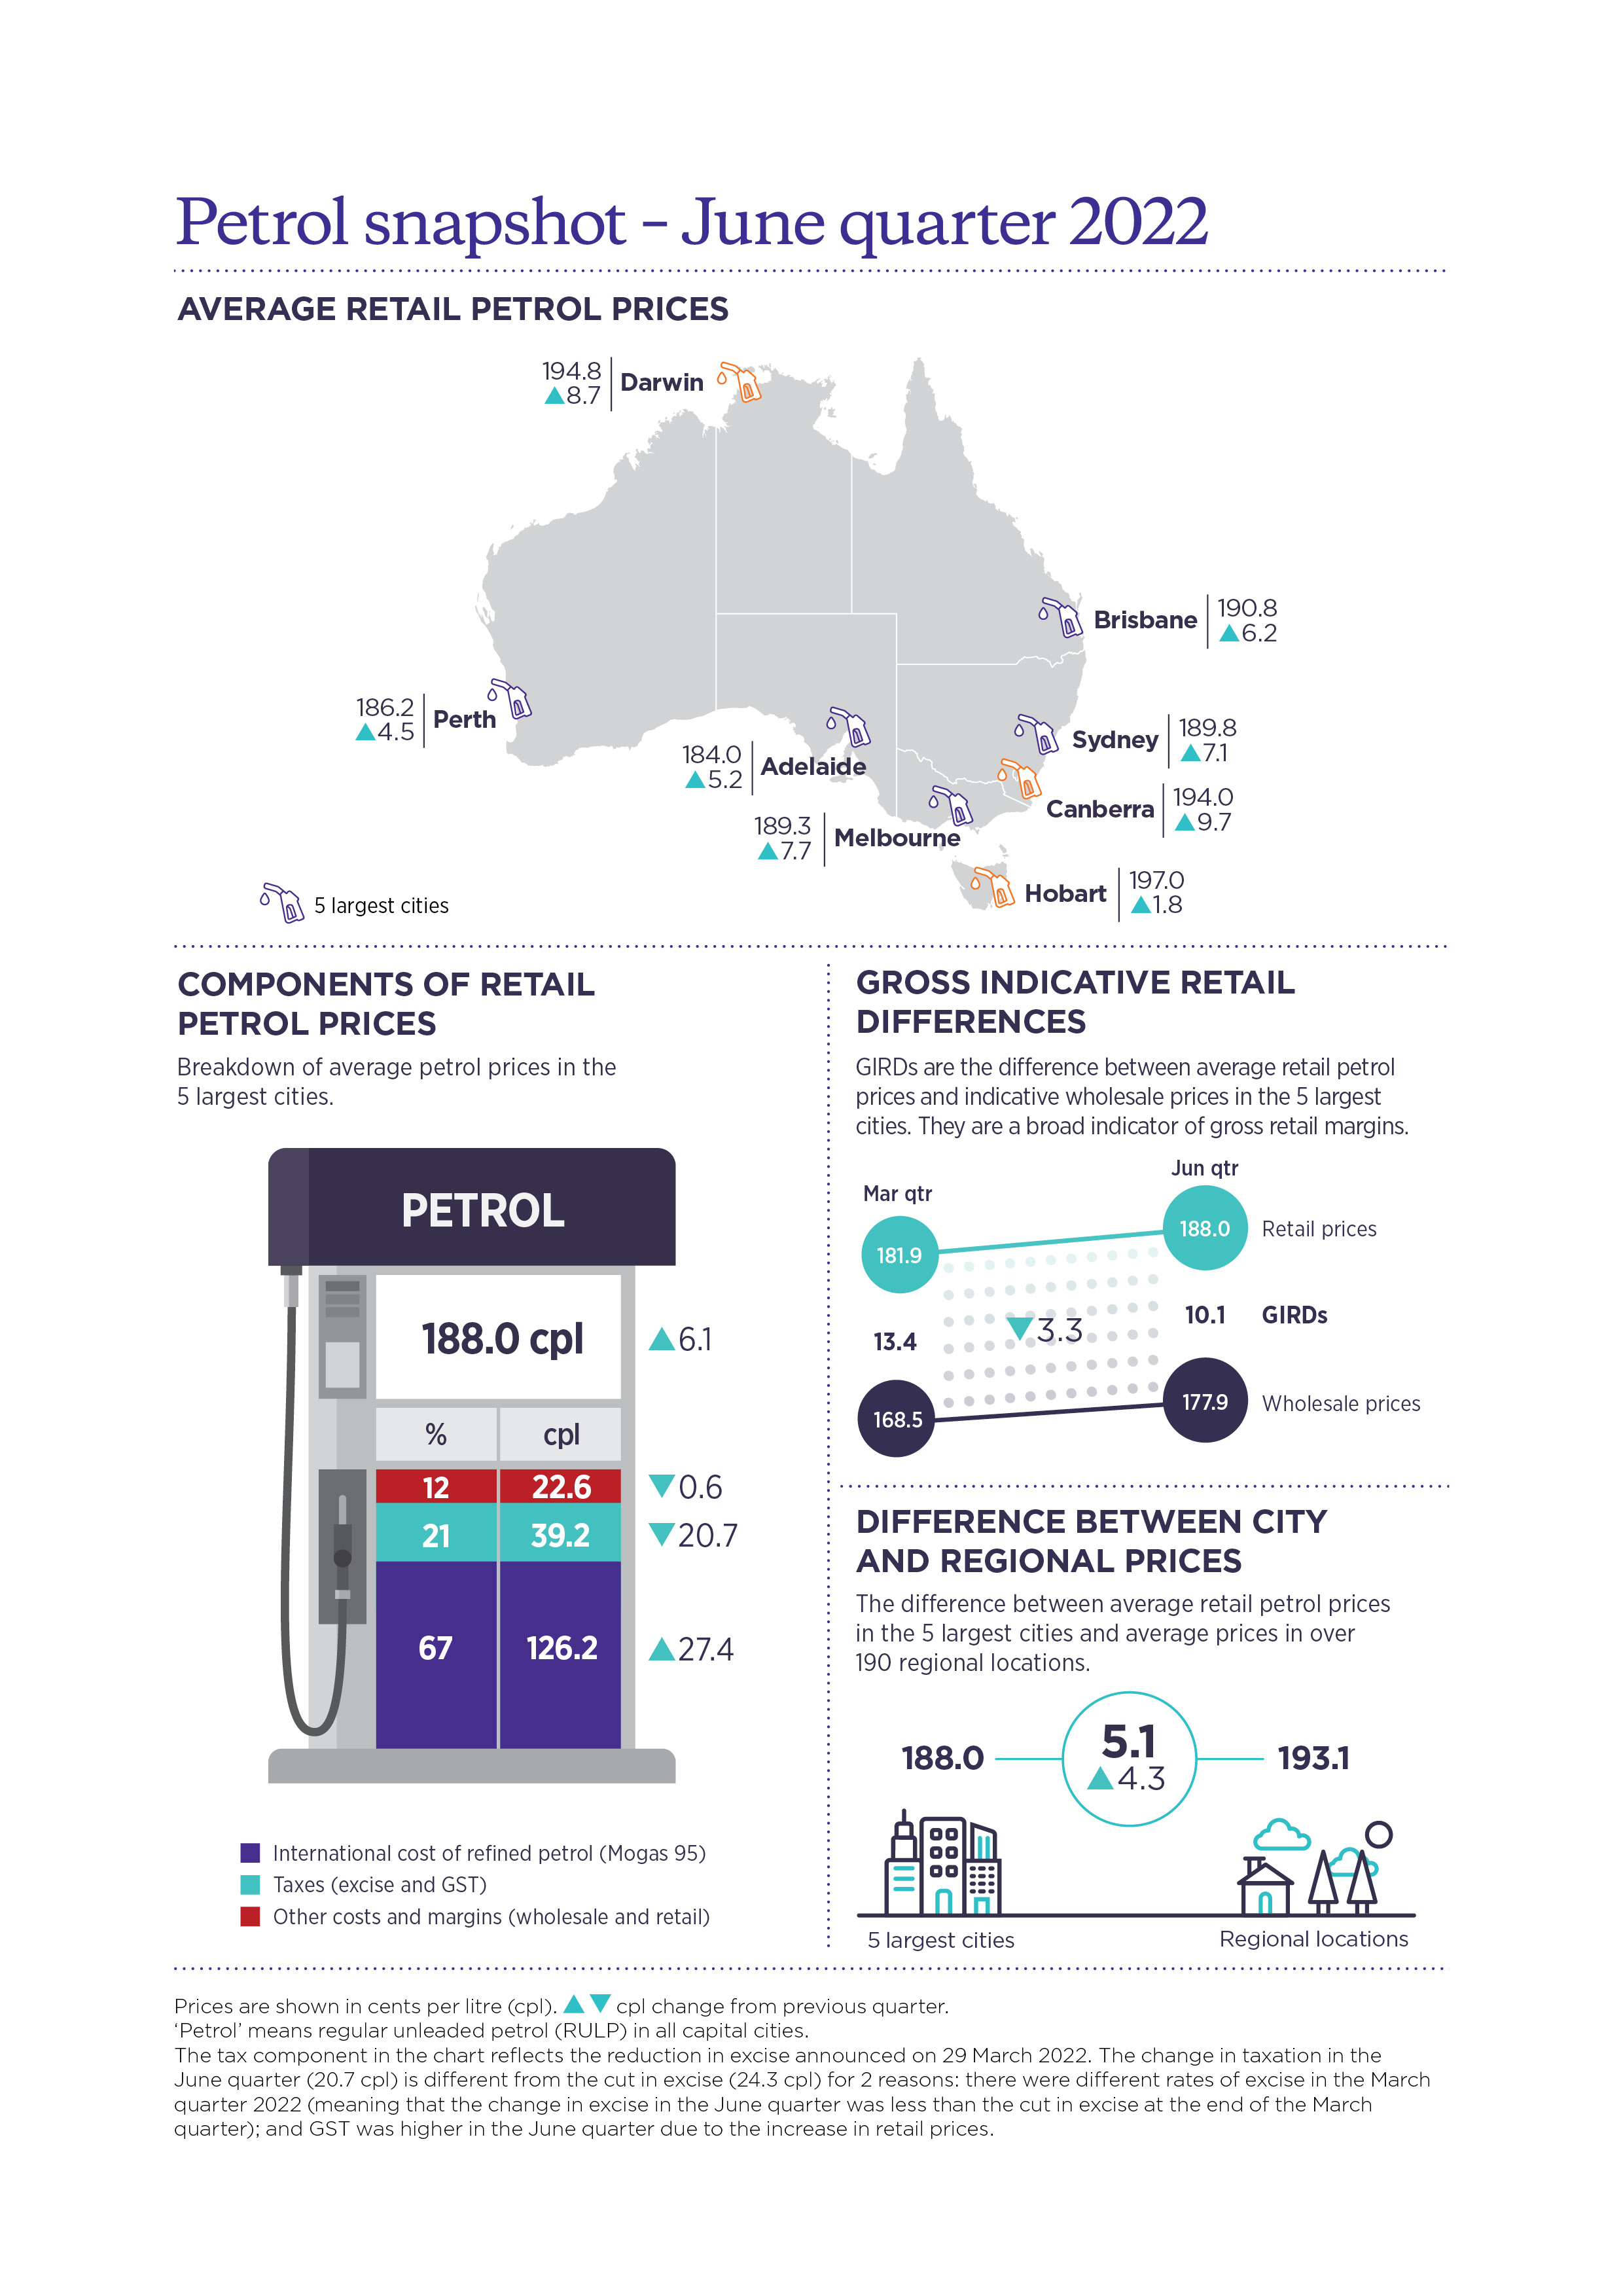 Petrol snapshot June quarter 2022. Average retail petrol prices for capital cities. Components of retail petrol prices. Difference between regional and city prices.